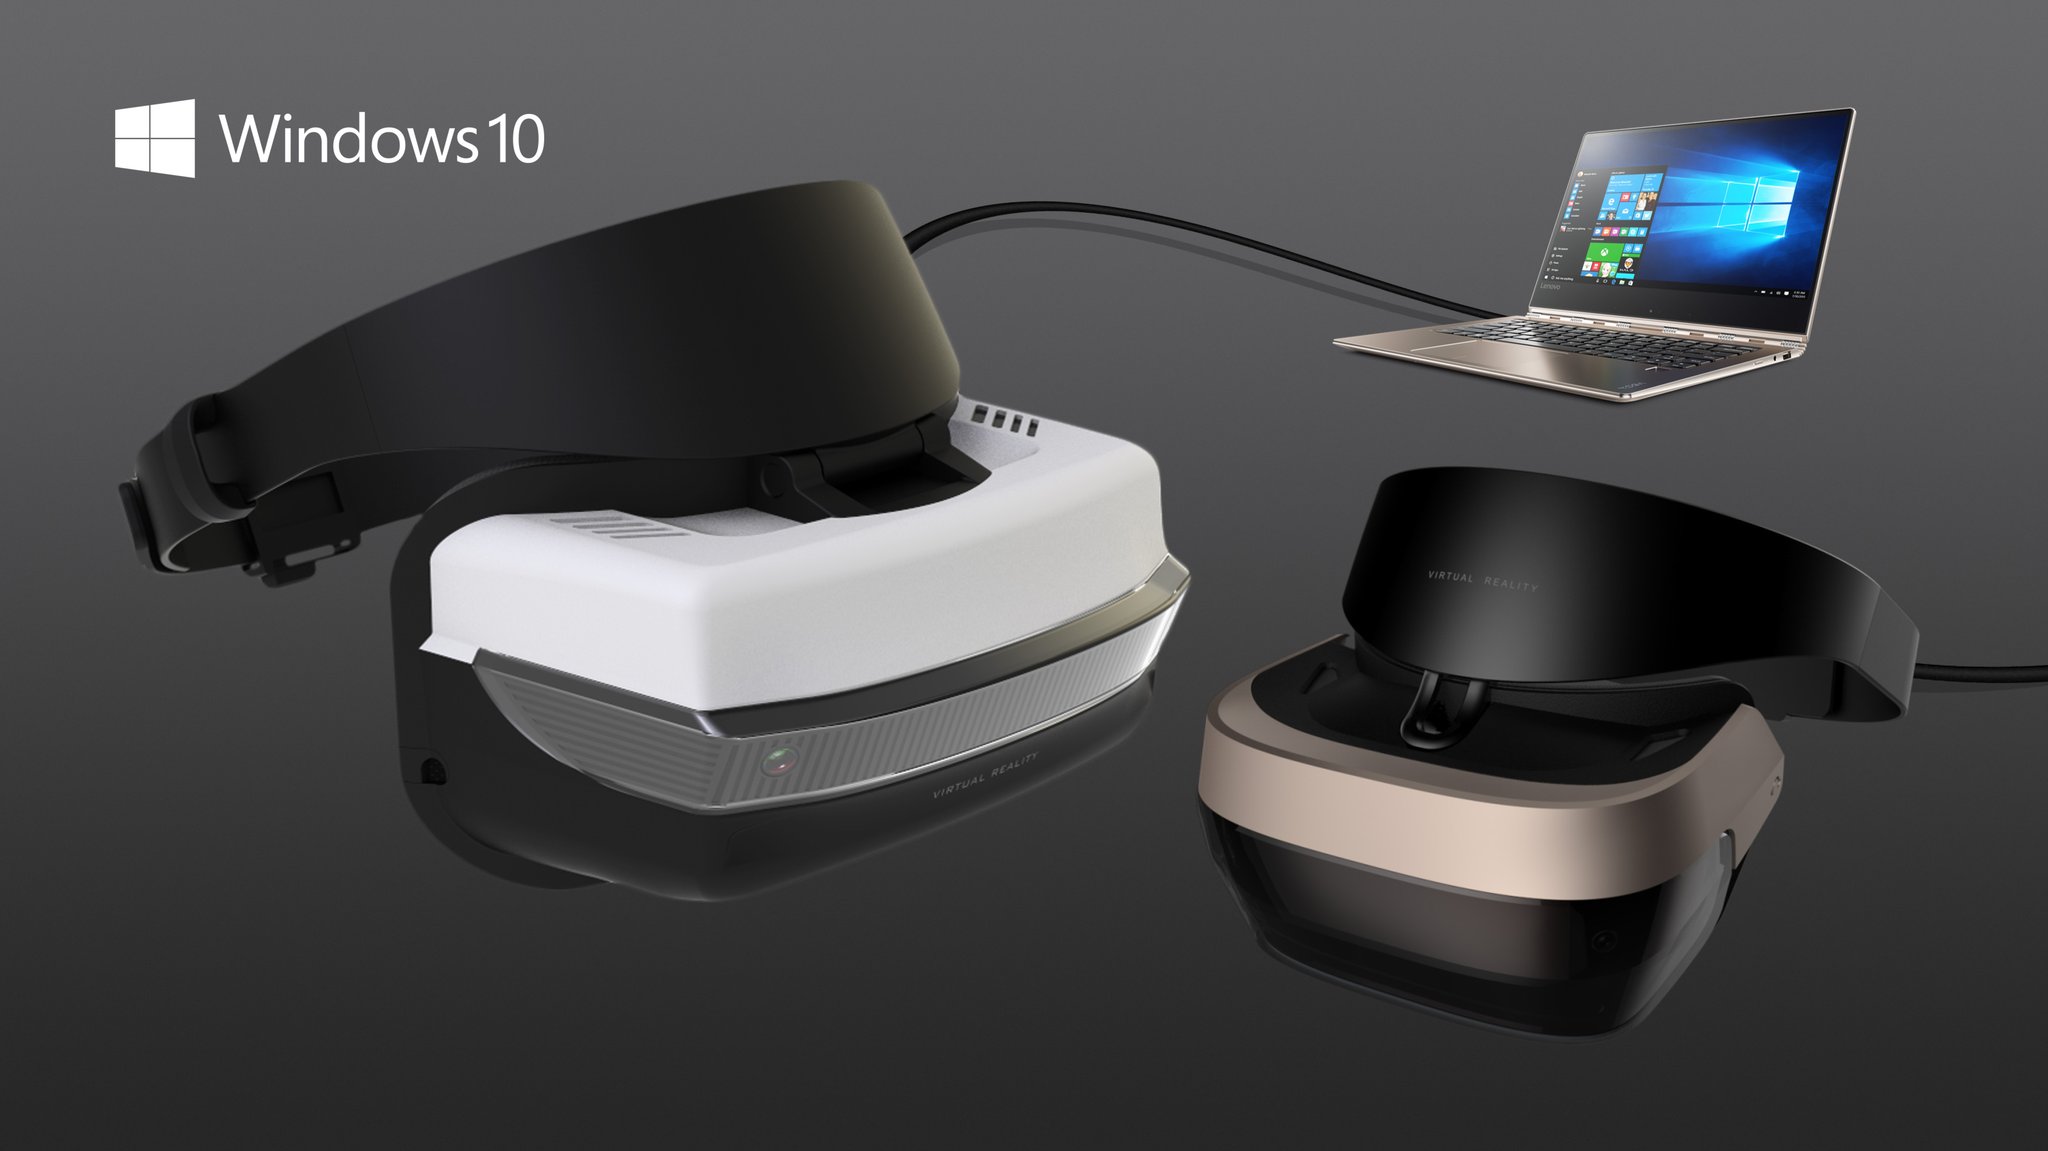 Microsoft low-cost VR headsets will work with Windeows 10 PCs